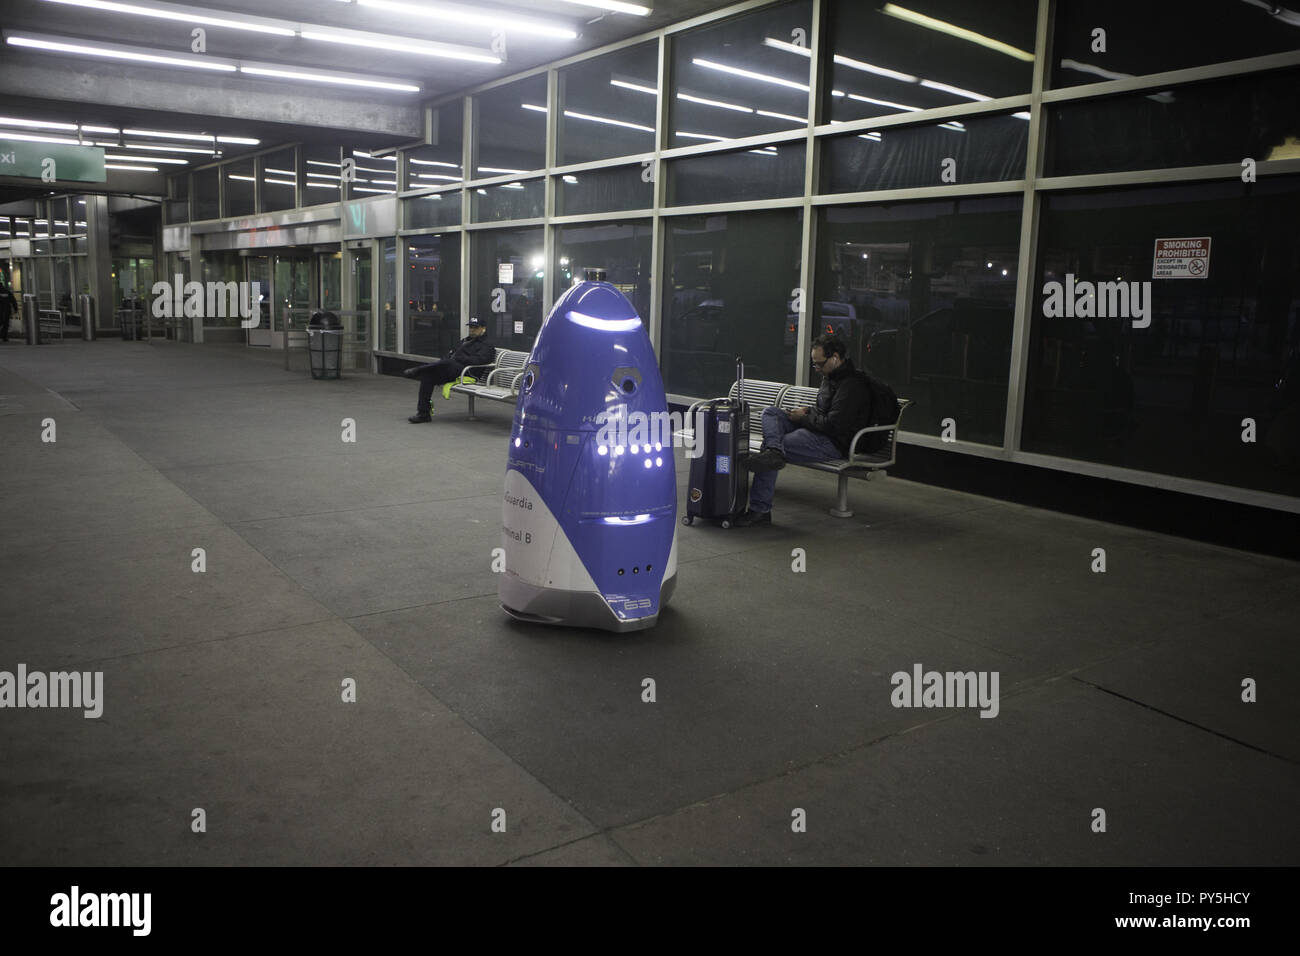 Queens, New York, USA. 24th Oct, 2018. KNIGHTSCOPE'S K5 ROBOT is shown outside baggage claim at Terminal B at LaGuardia Airport in Queens, New York. The K5 security units records everything with it's cameras, microphones, and sensors. Source says with the introduction of 5G technology occupations such as security guards and gaming surveillance officers will be eliminated by automation. Credit: Brian Branch Price/ZUMA Wire/Alamy Live News Stock Photo